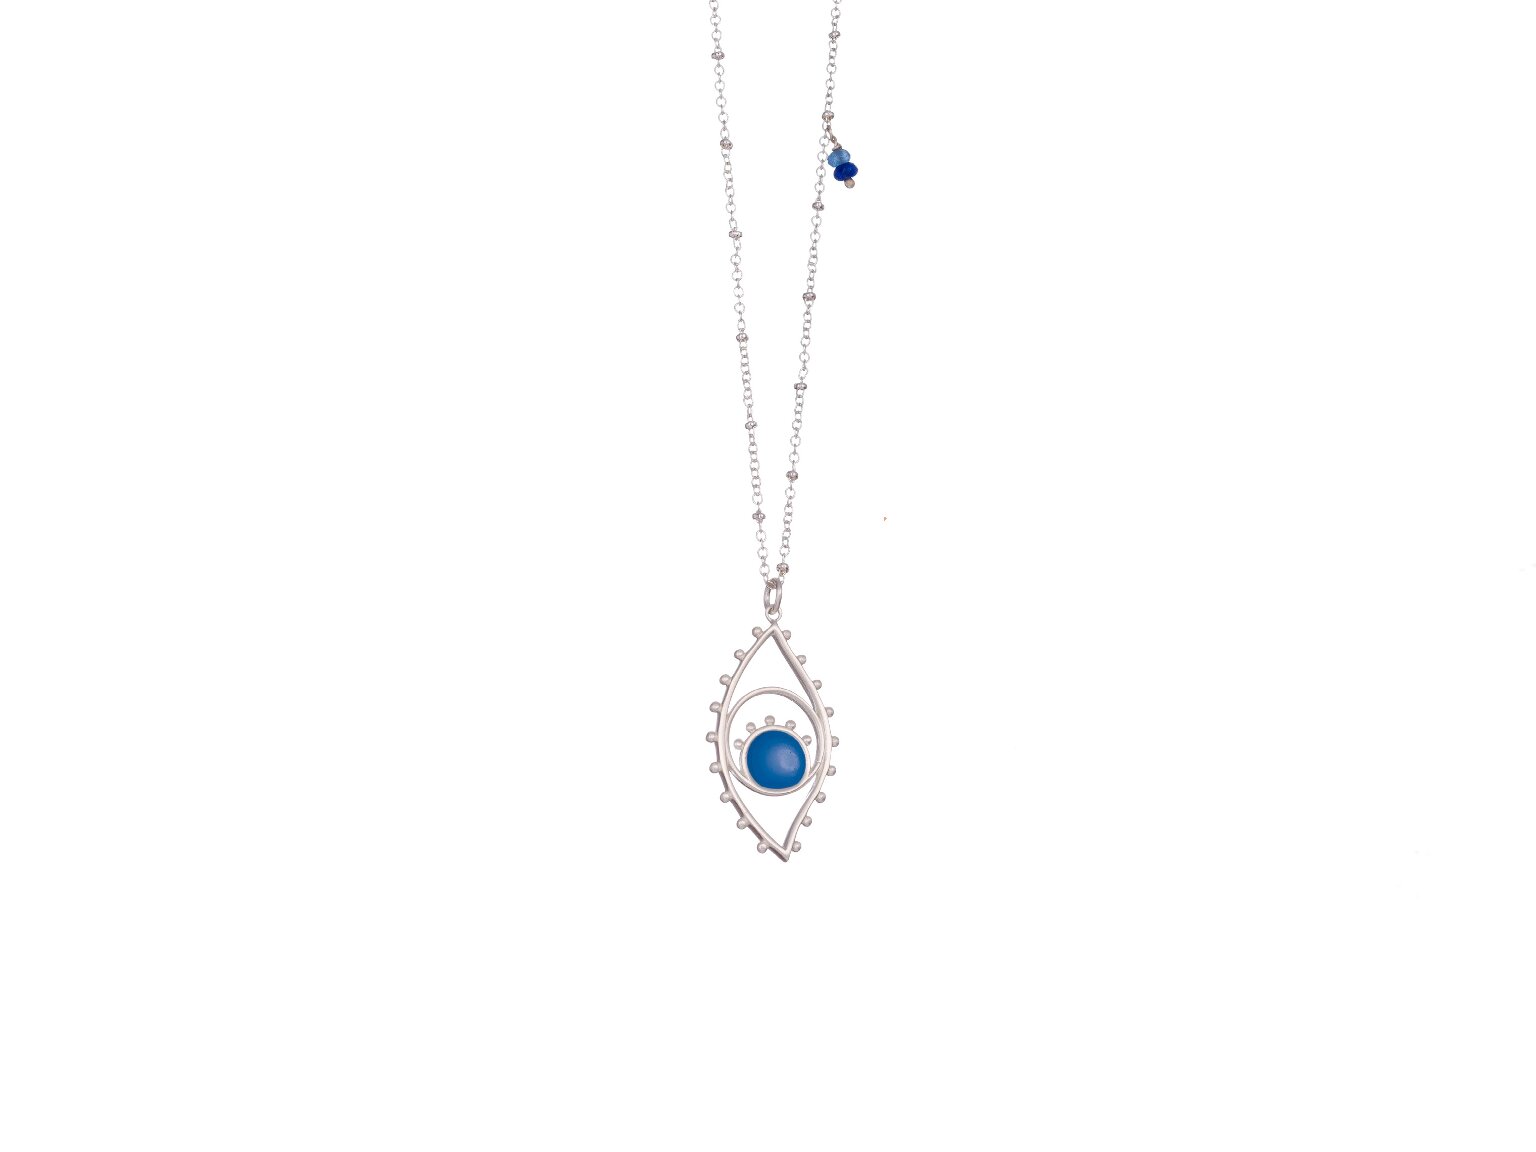 Silver-plated eye necklace